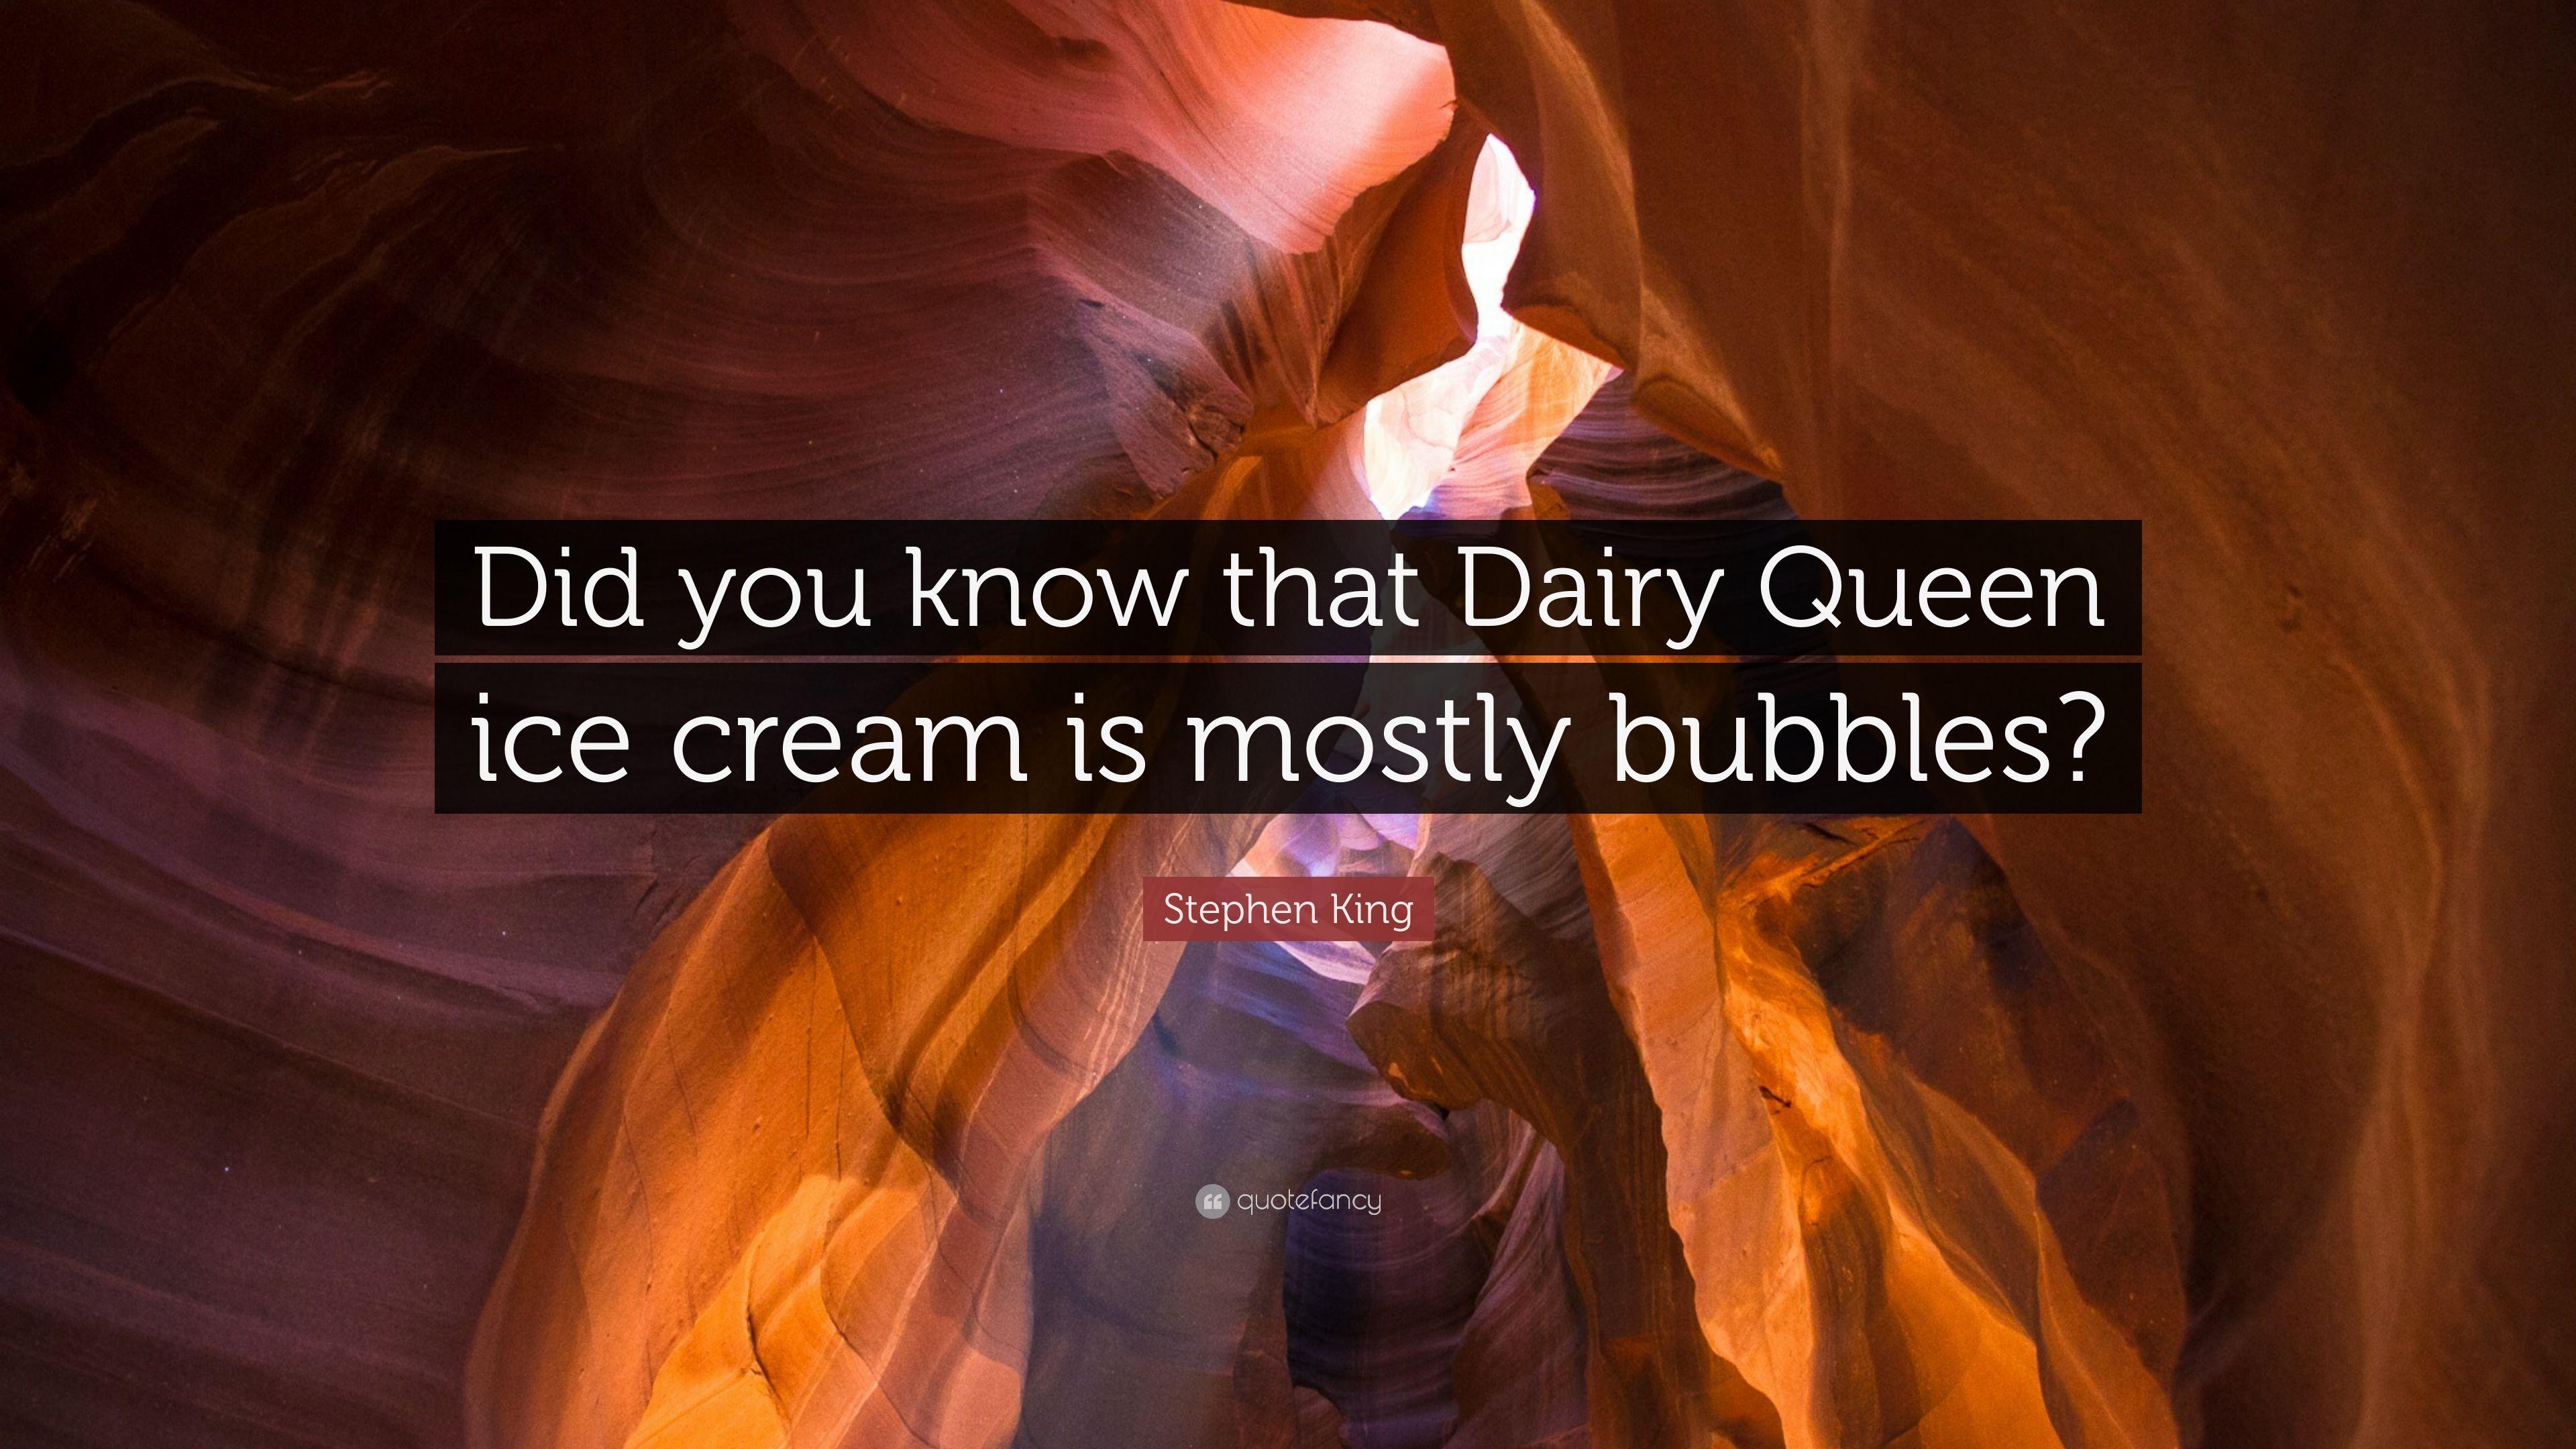 Stephen King Quote: “Did you know that Dairy Queen ice cream is